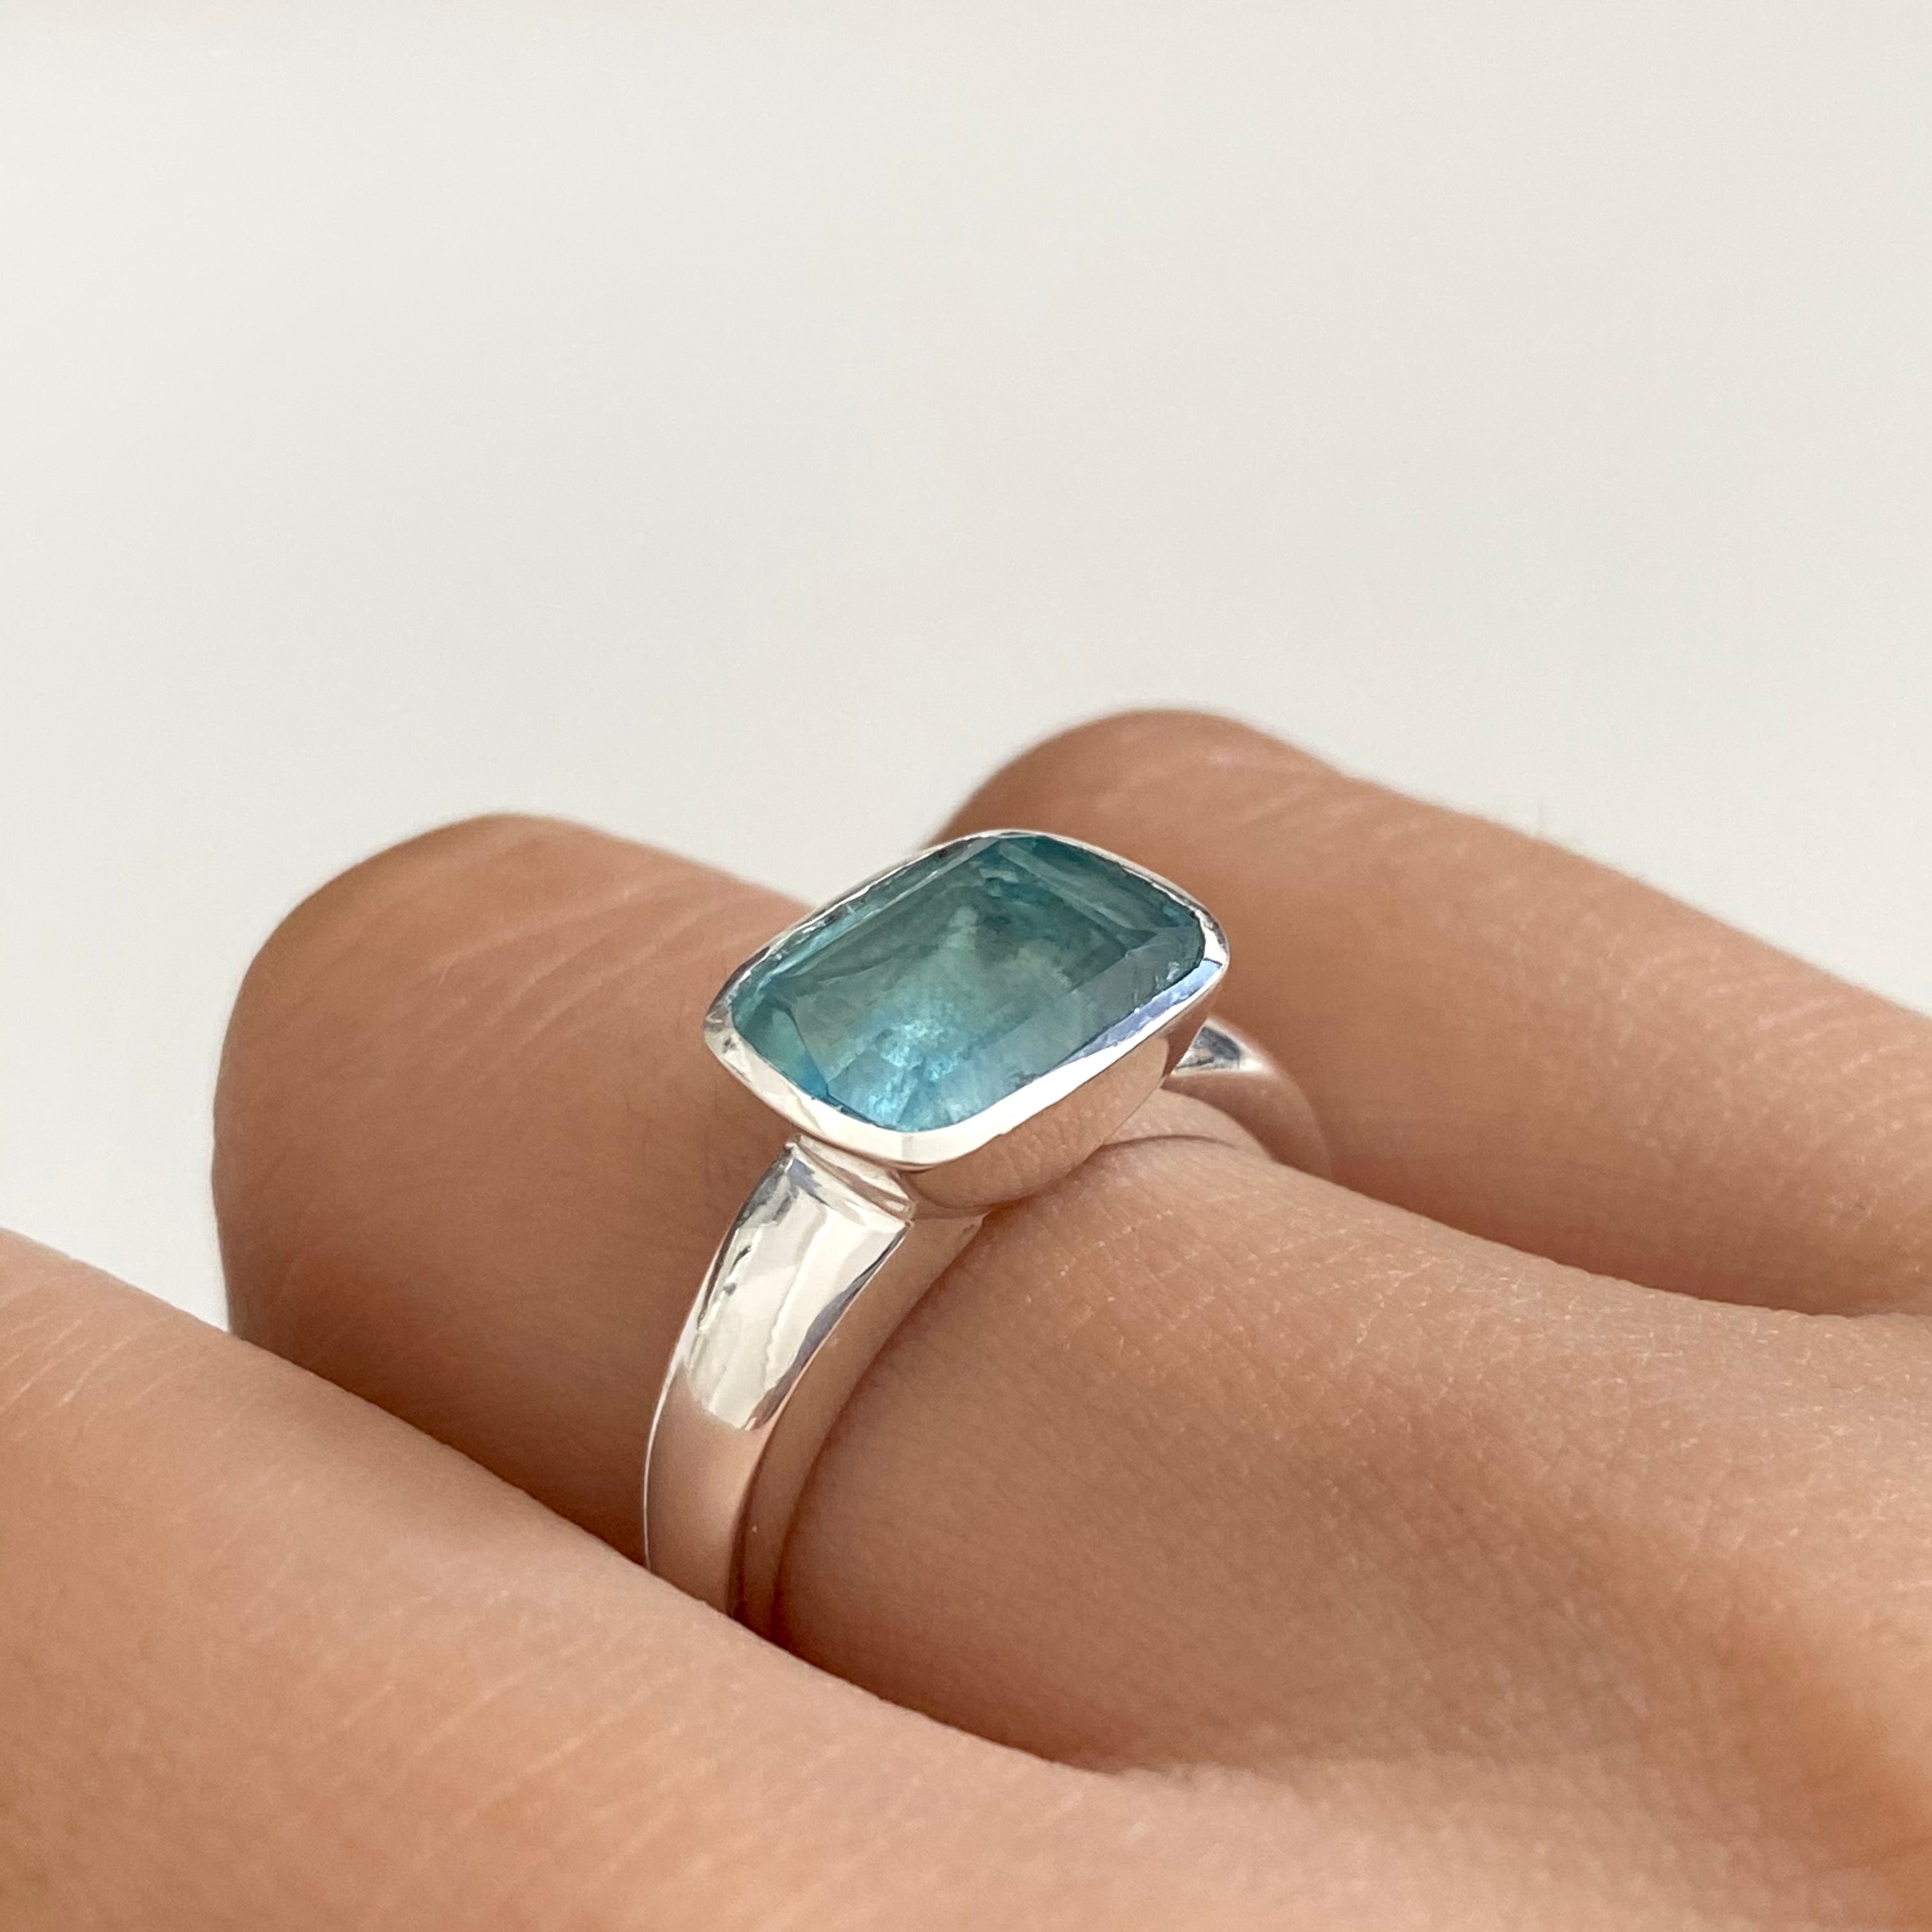 Faceted Rectangular Cut Natural Gemstone Sterling Silver Ring - Apatite